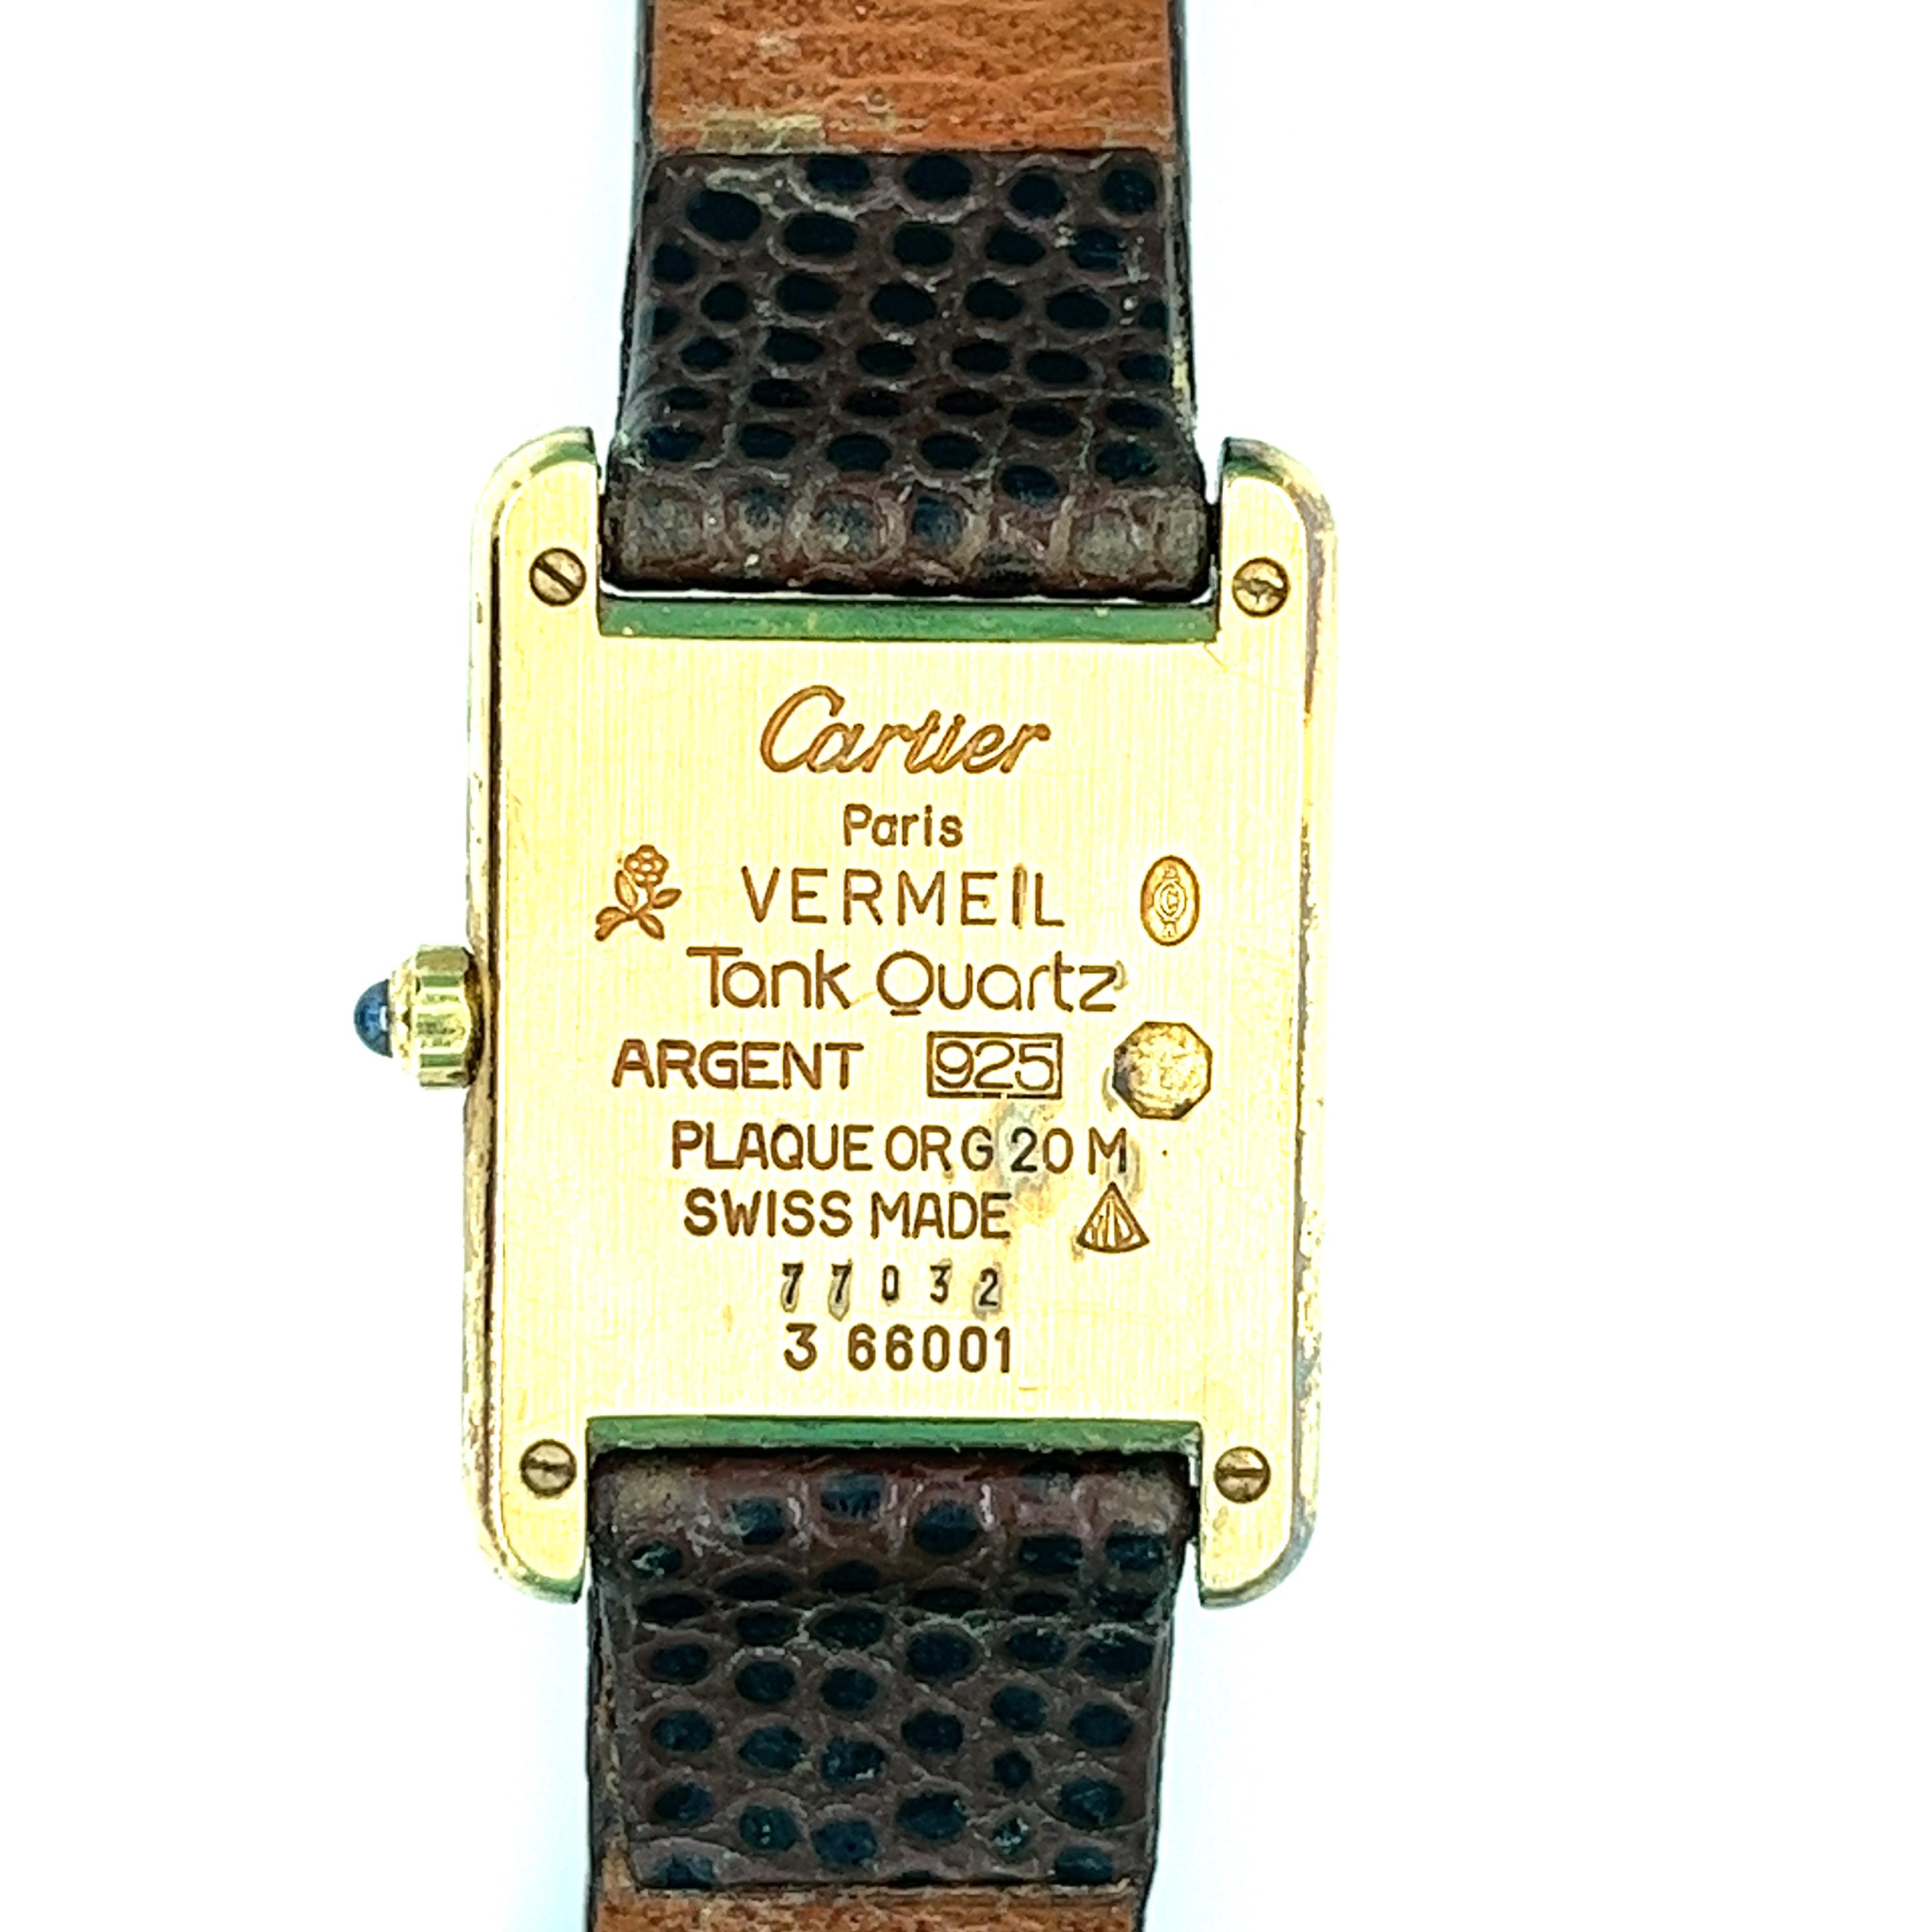 Vintage Cartier Tank 24mm gold vermeil with quartz movement. Features black dial, no numerals, screw down crown.

- Brand: Cartier
- Model: Tank
- Bracelet Material: Leather (replacement)
- Year of production: 1986 (Approximation)
- Condition: